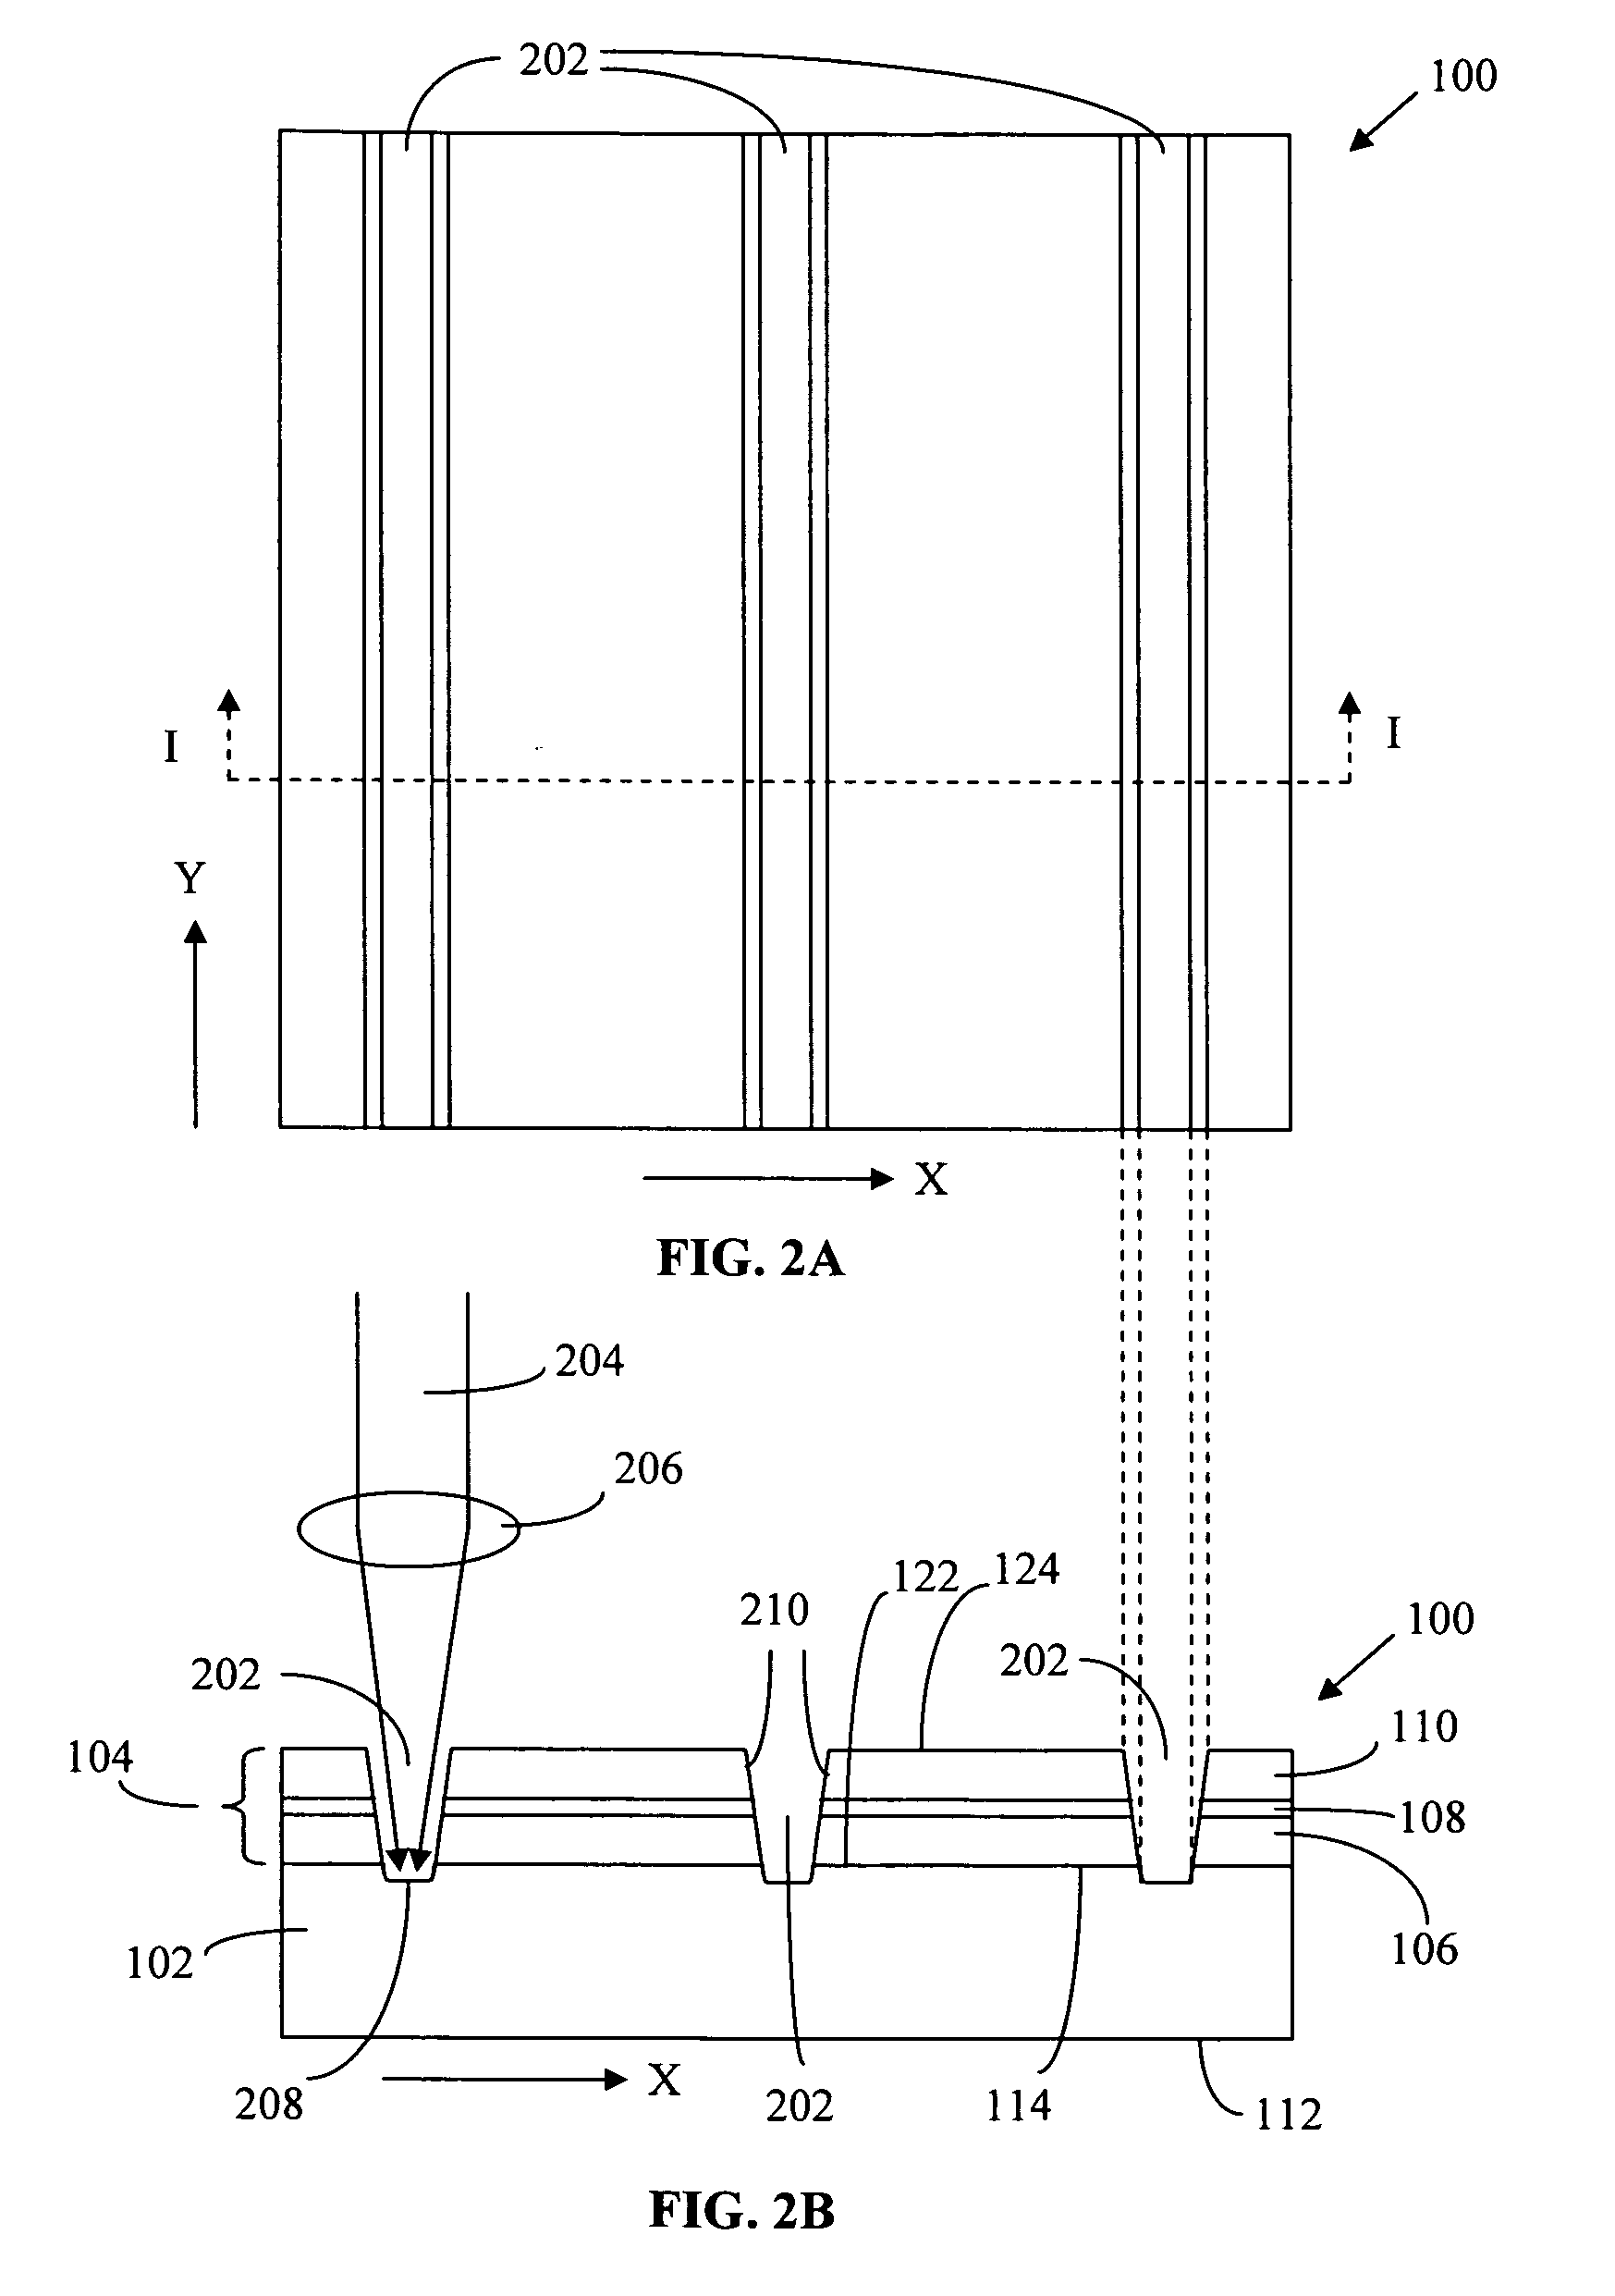 Method for fabricating a light emitting diode chip